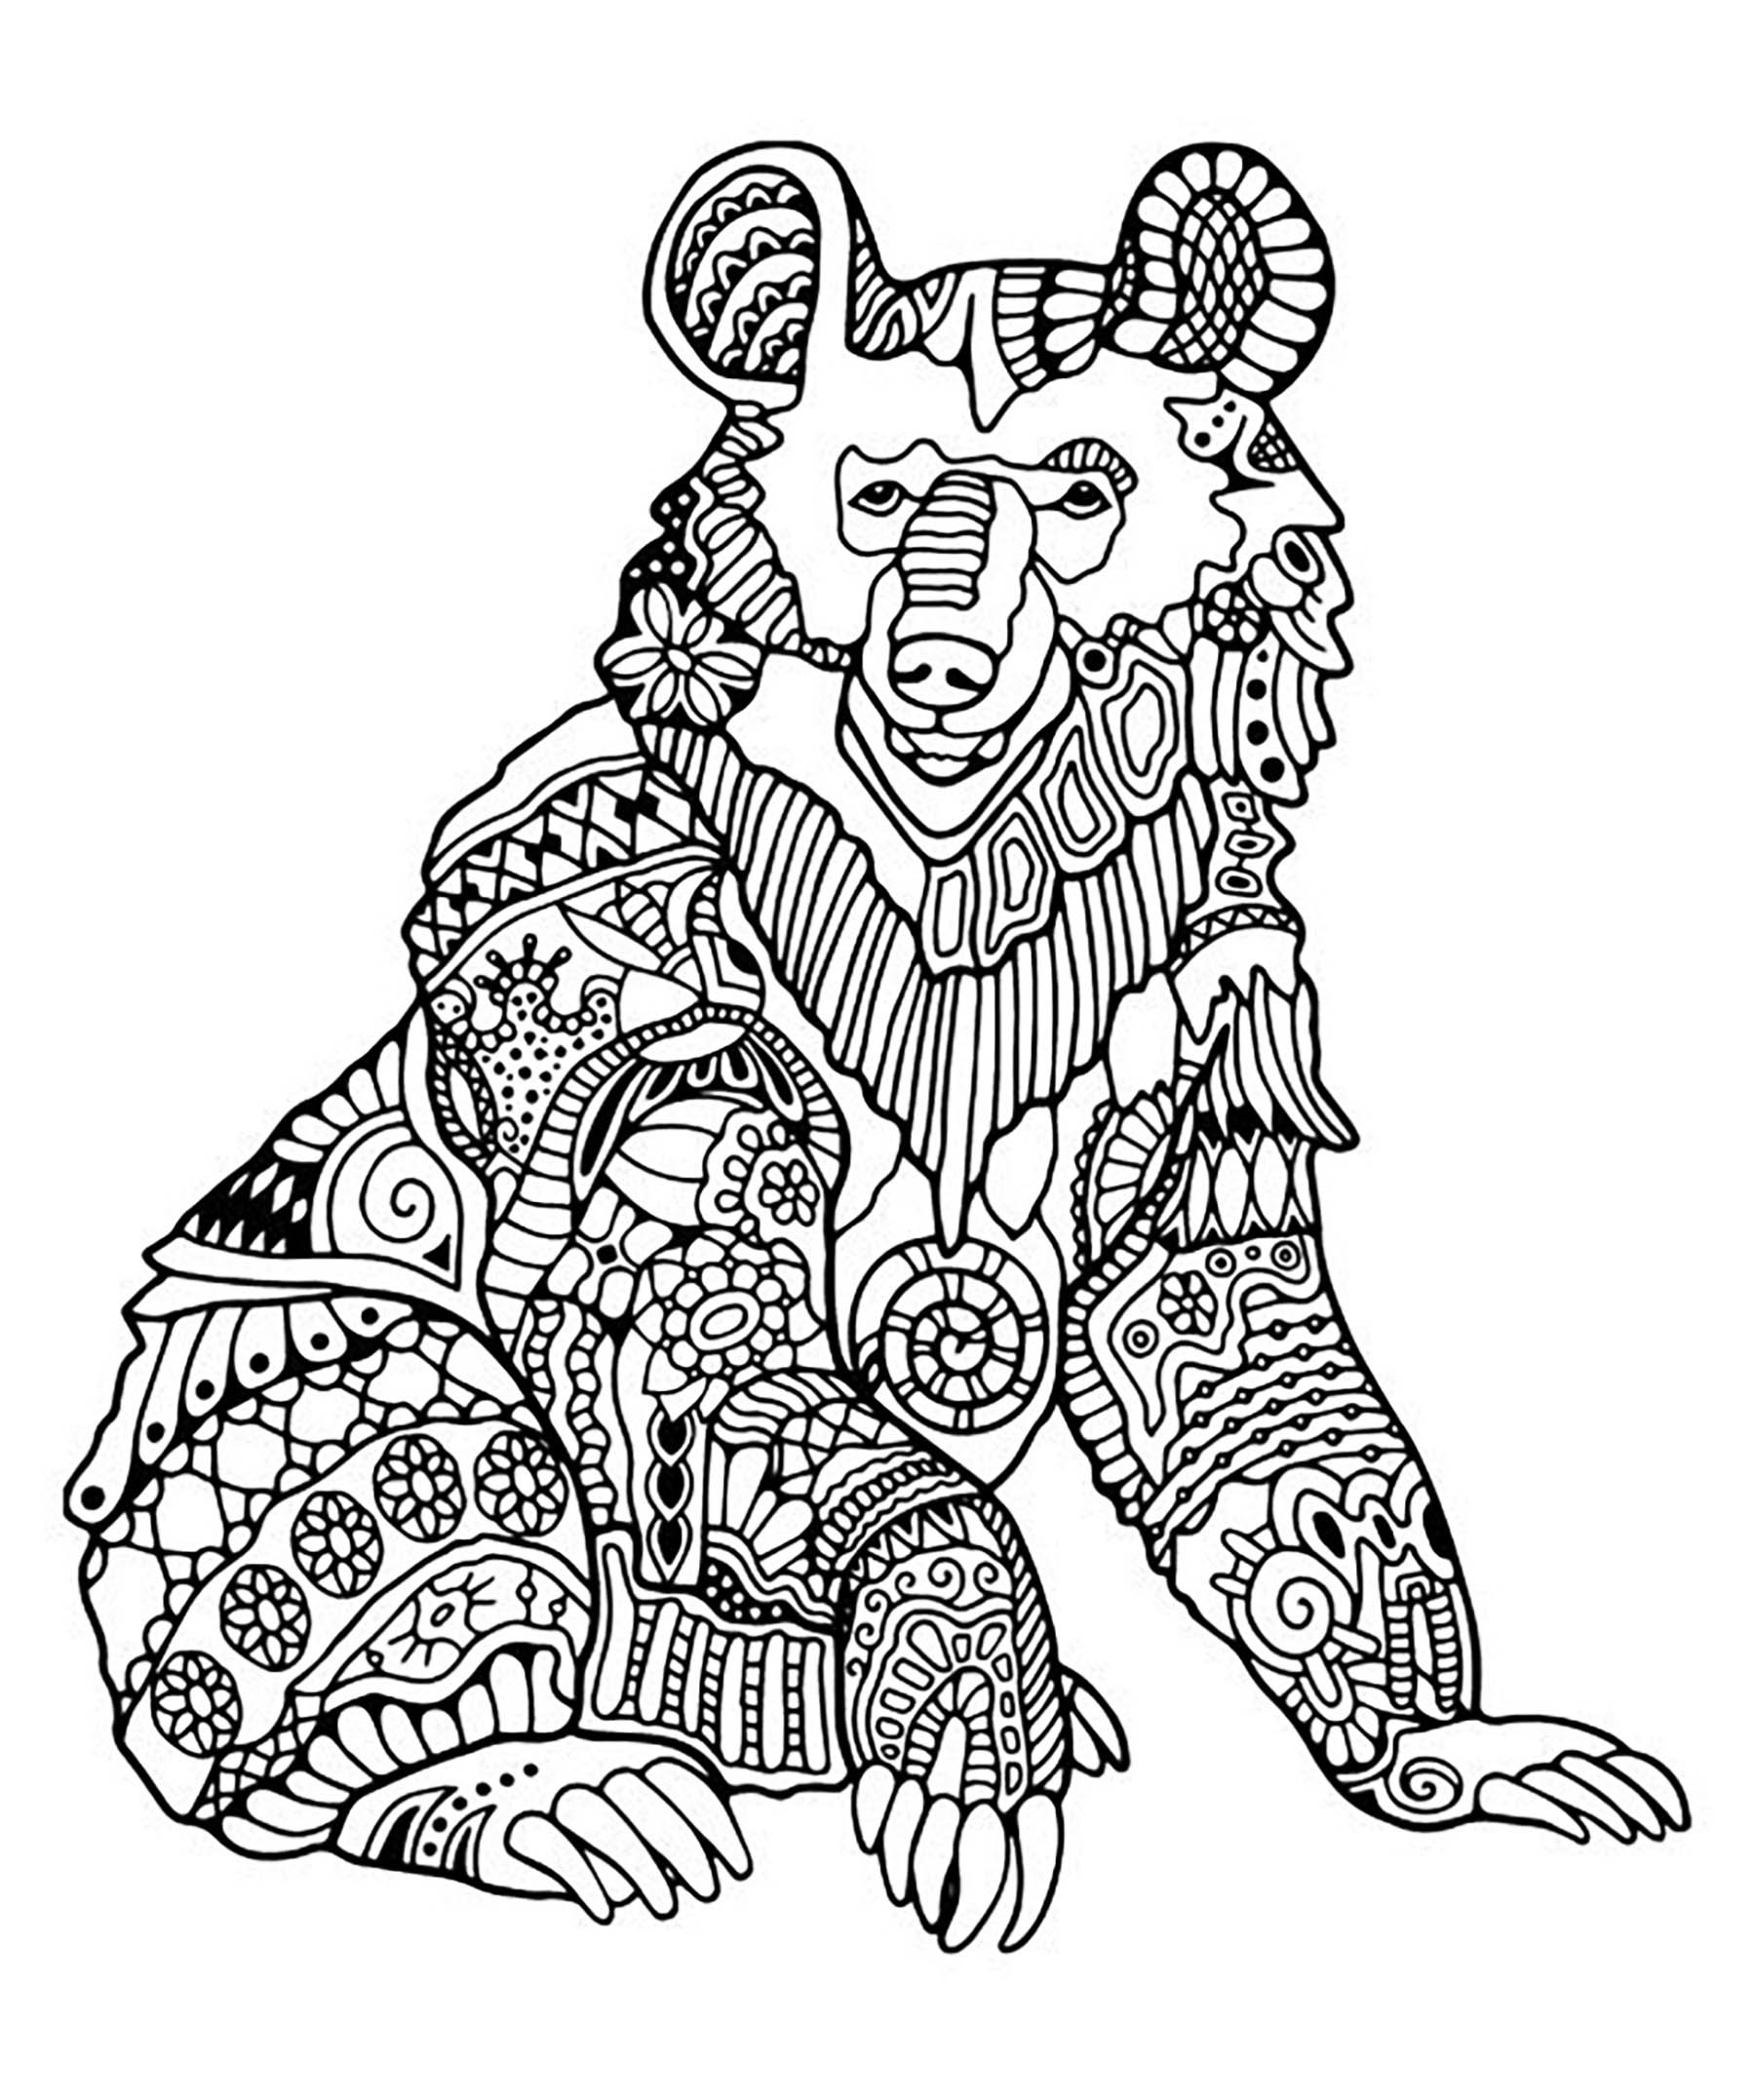 Coloring page of a Bear